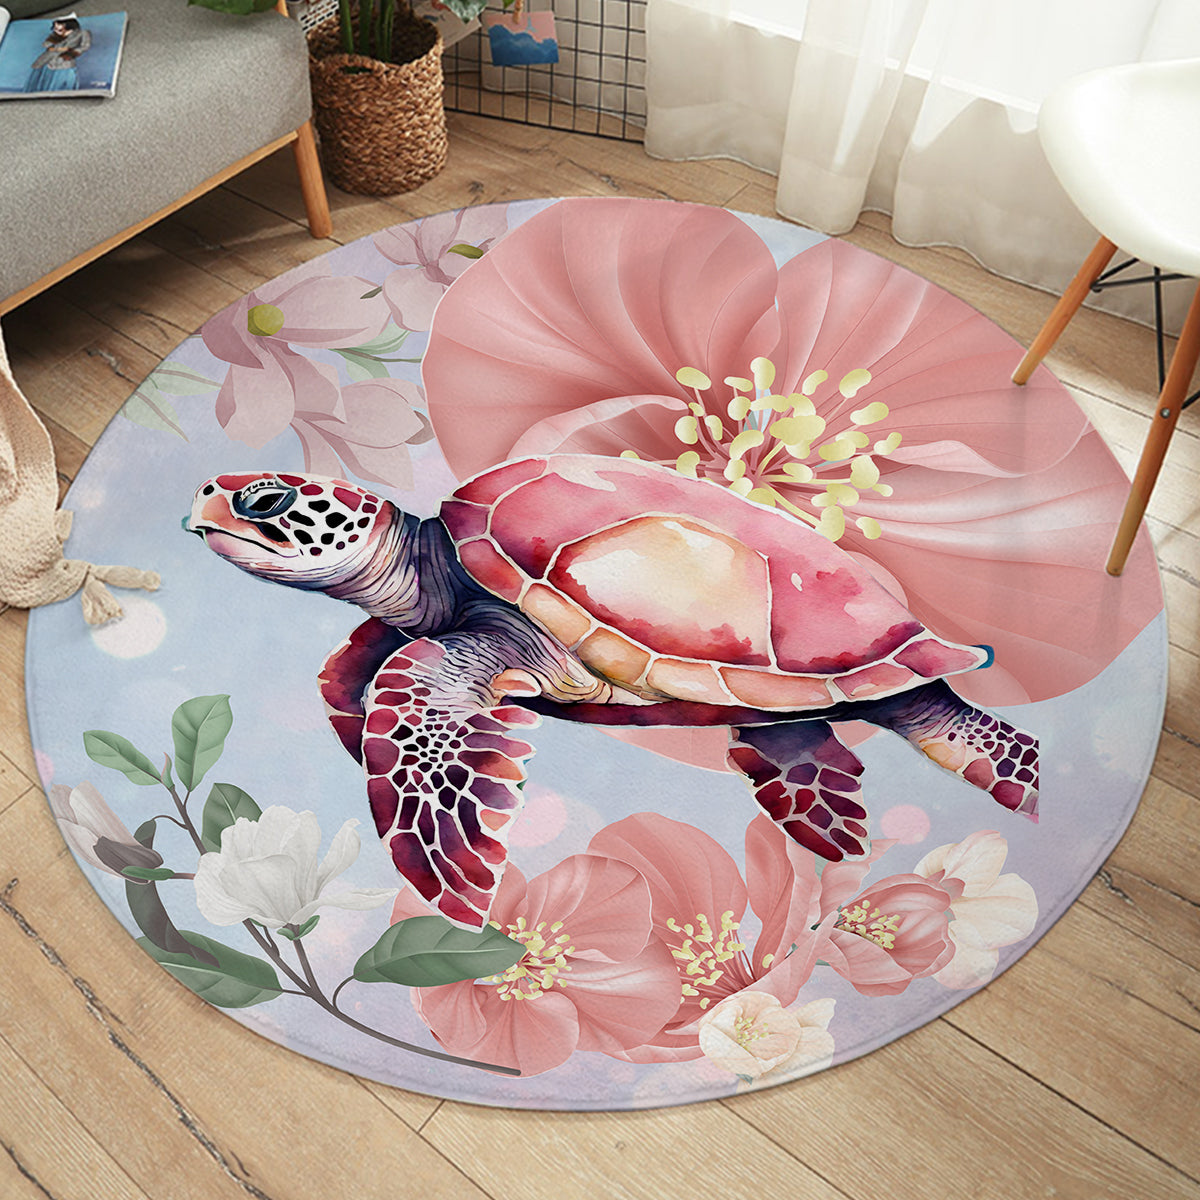 Turtle Blossoms Round Area Rug